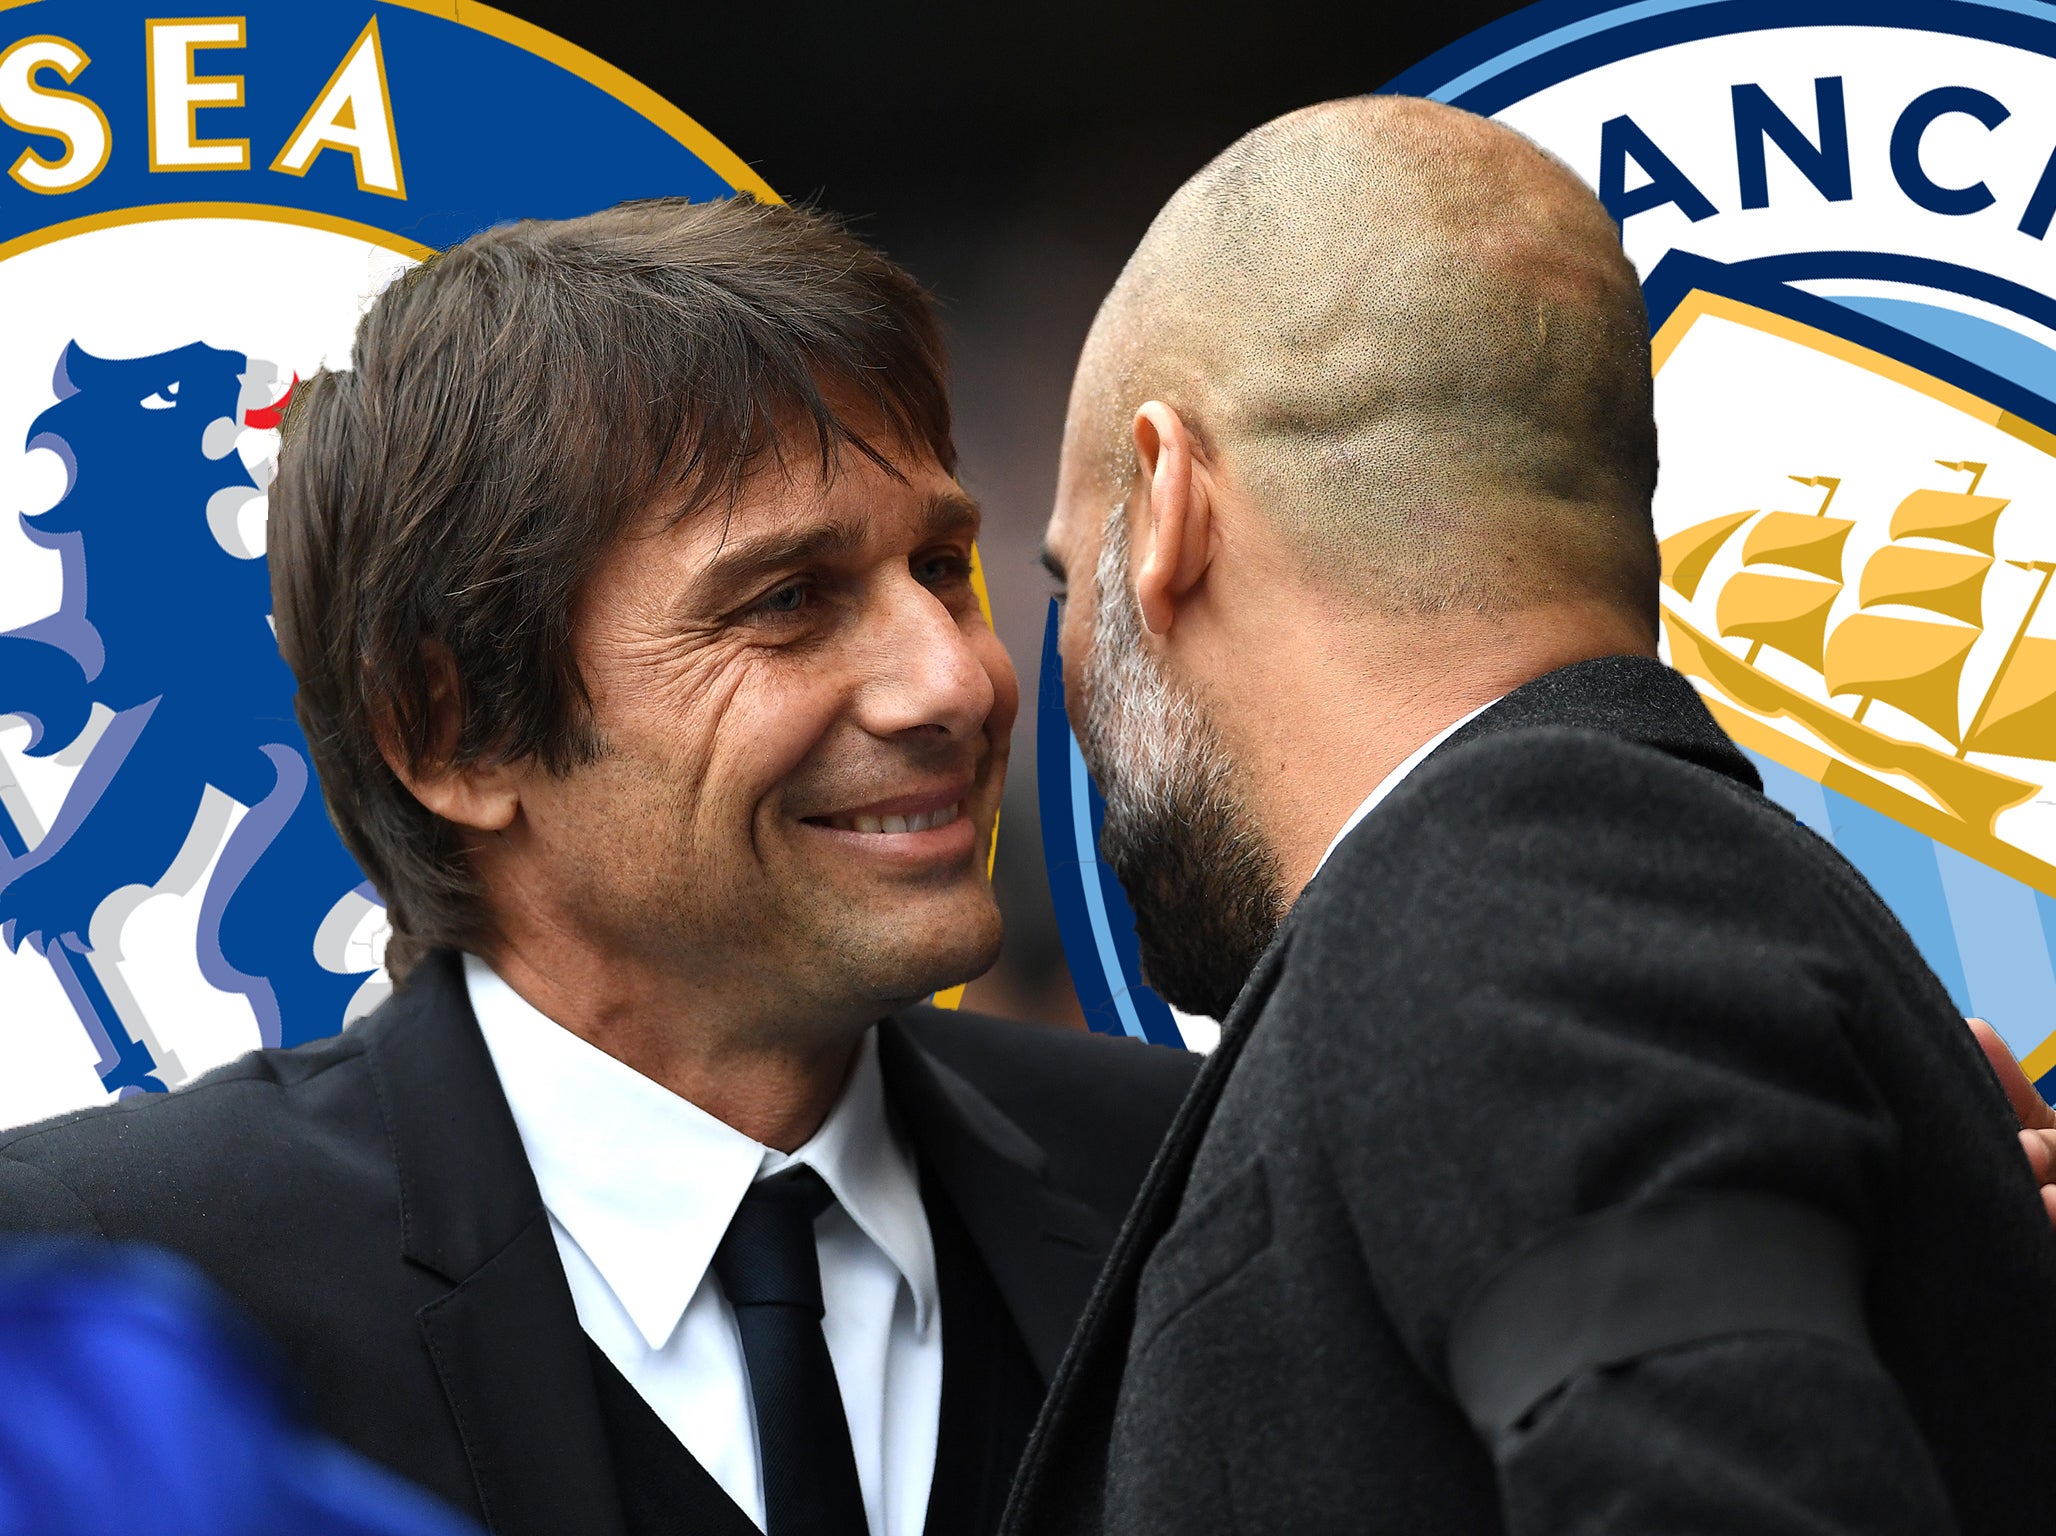 Conte and Guardiola both respect one another greatly